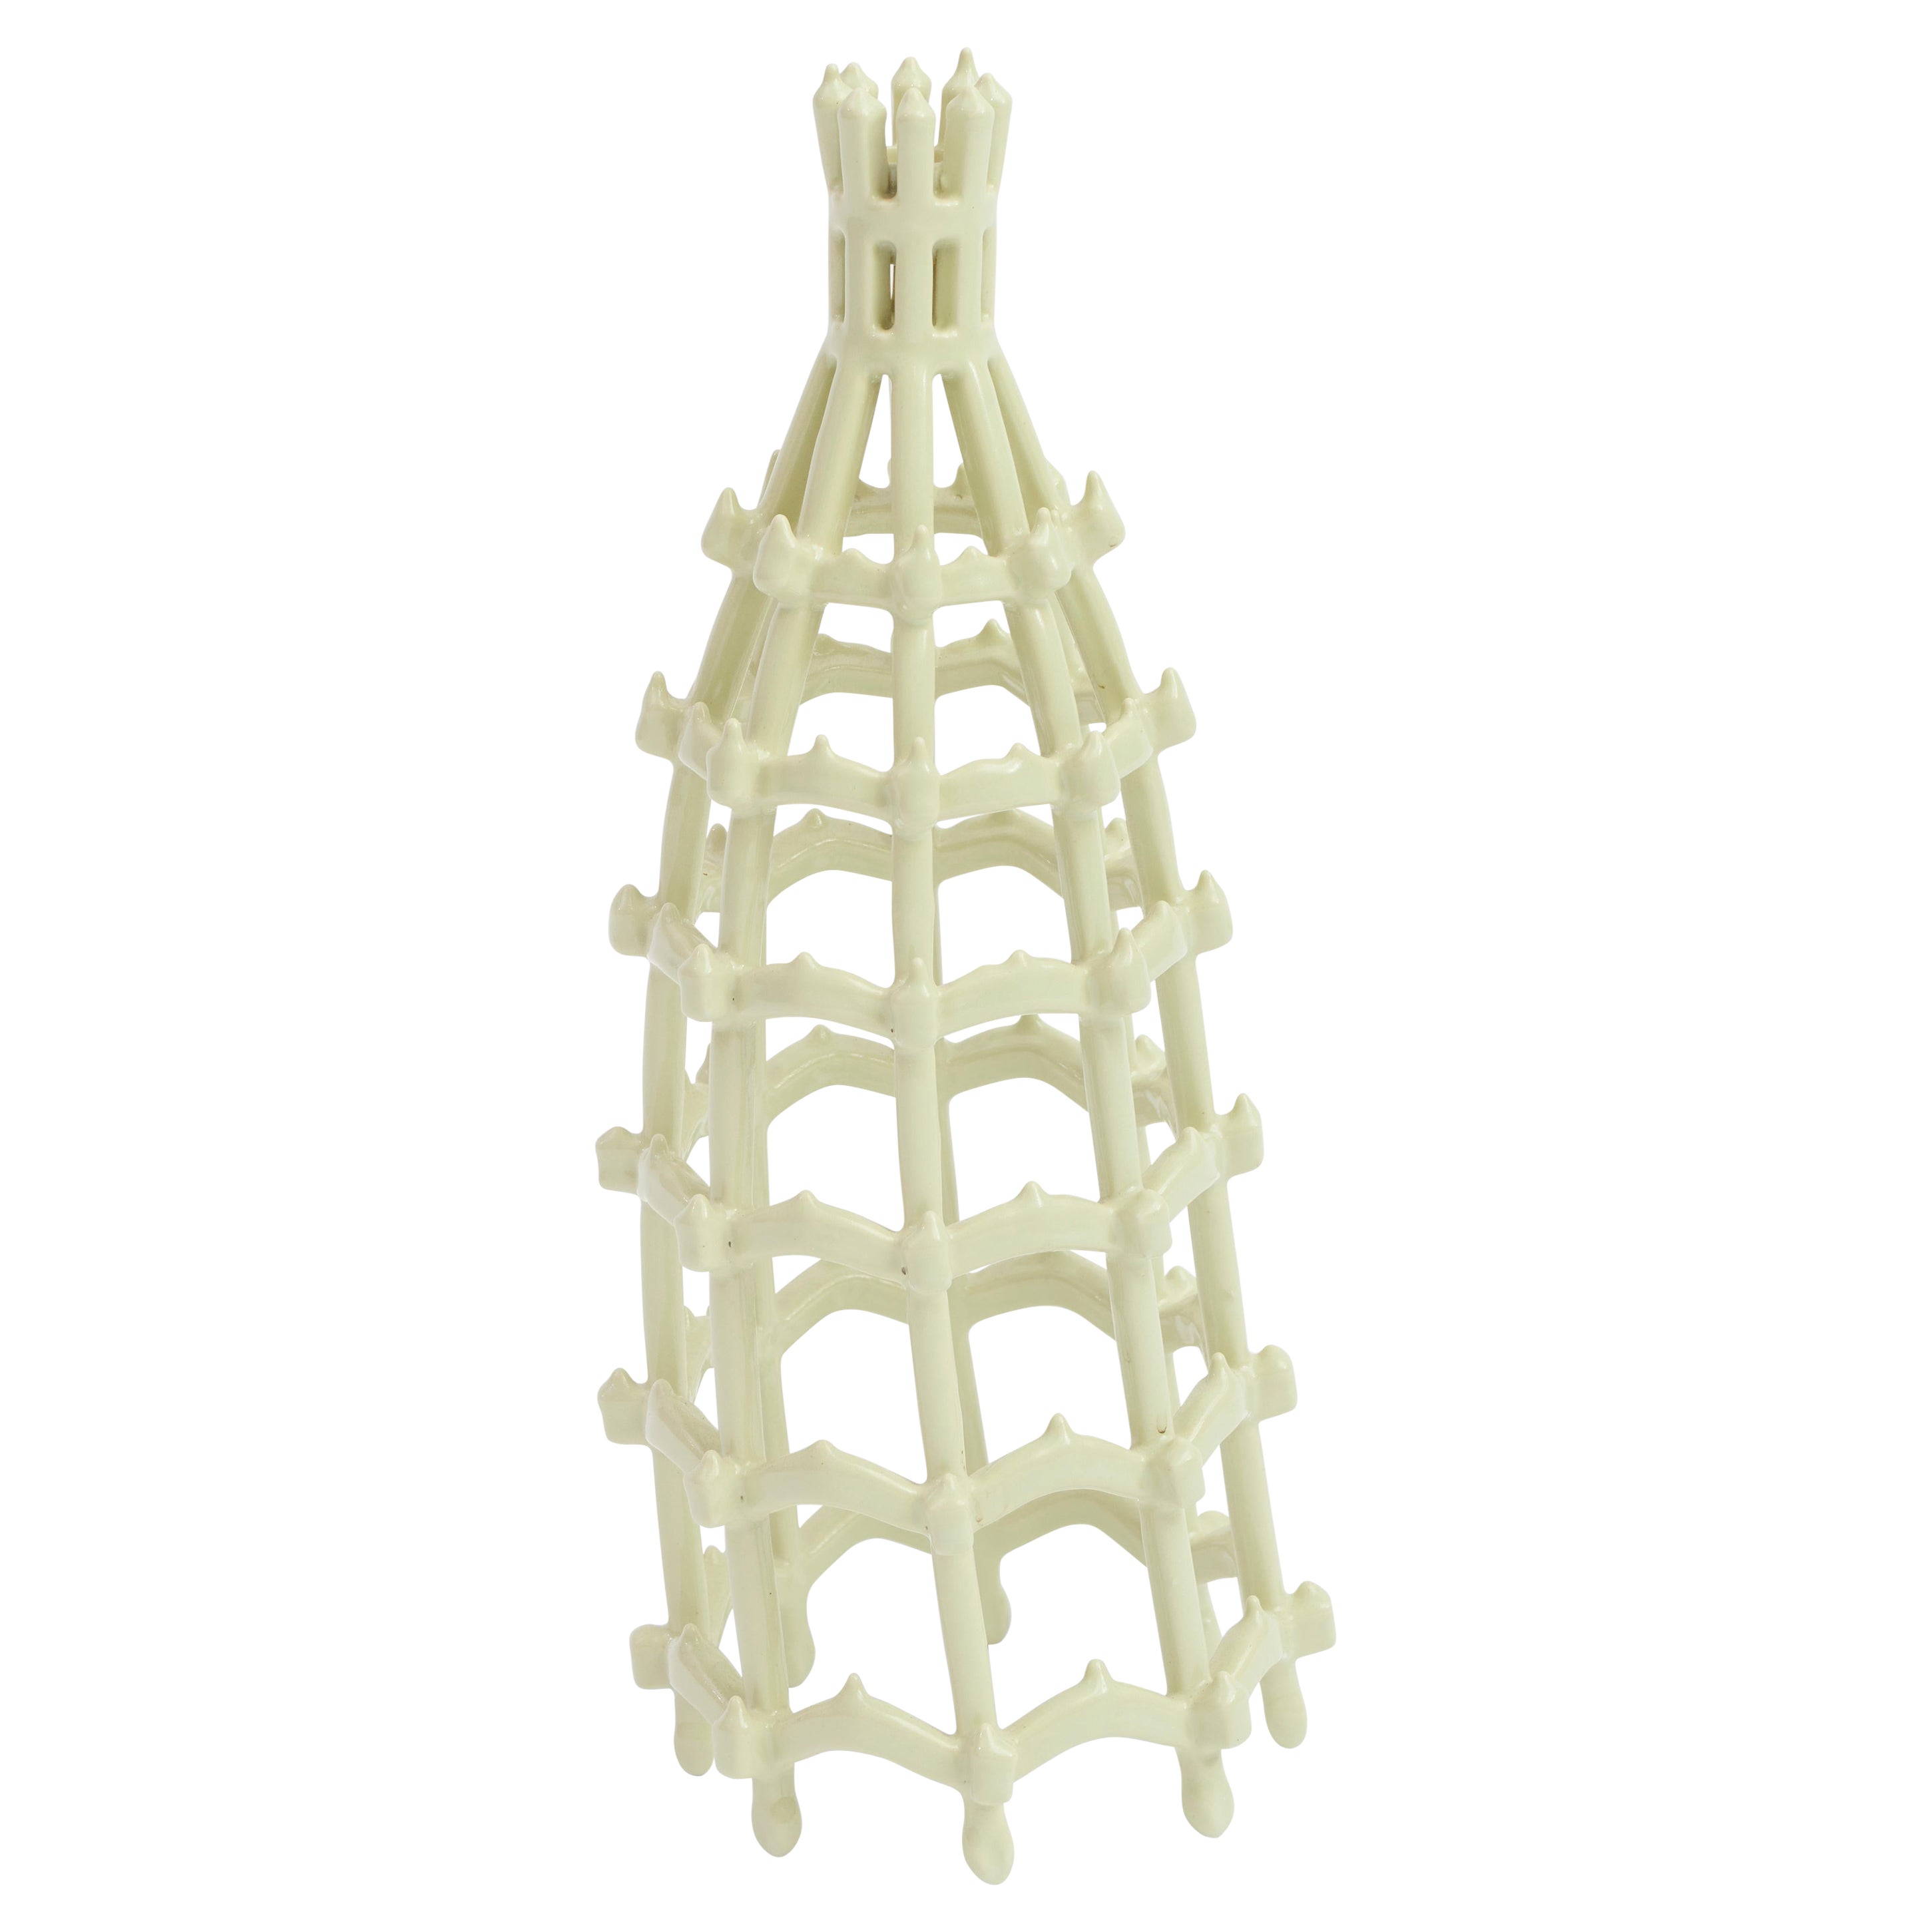 Handmade Porcelain Candle Holder in Pale Green, size Medium, by Atelier Fig.  For Sale